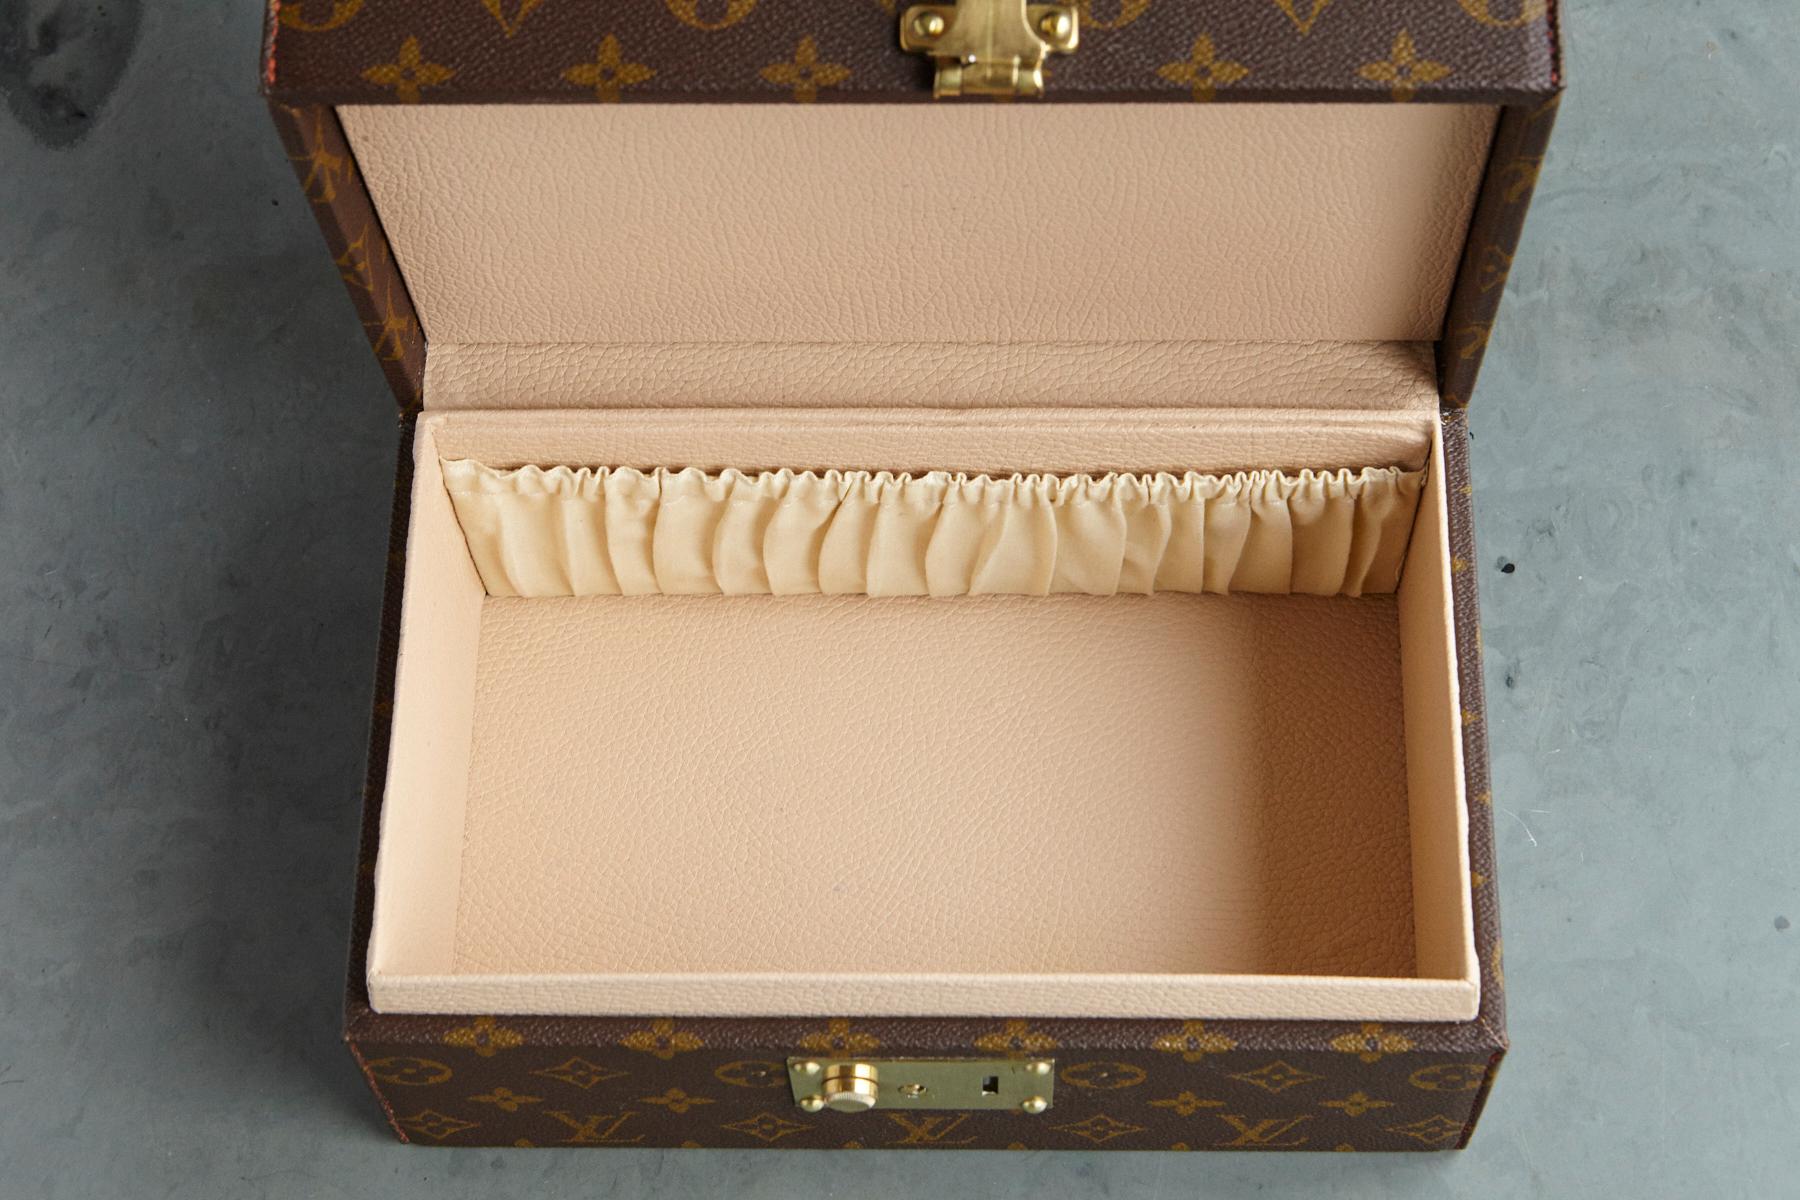 Louis Vuitton Monogram Vanity or Cosmetic Case from the Collection of Ann Turkel 2